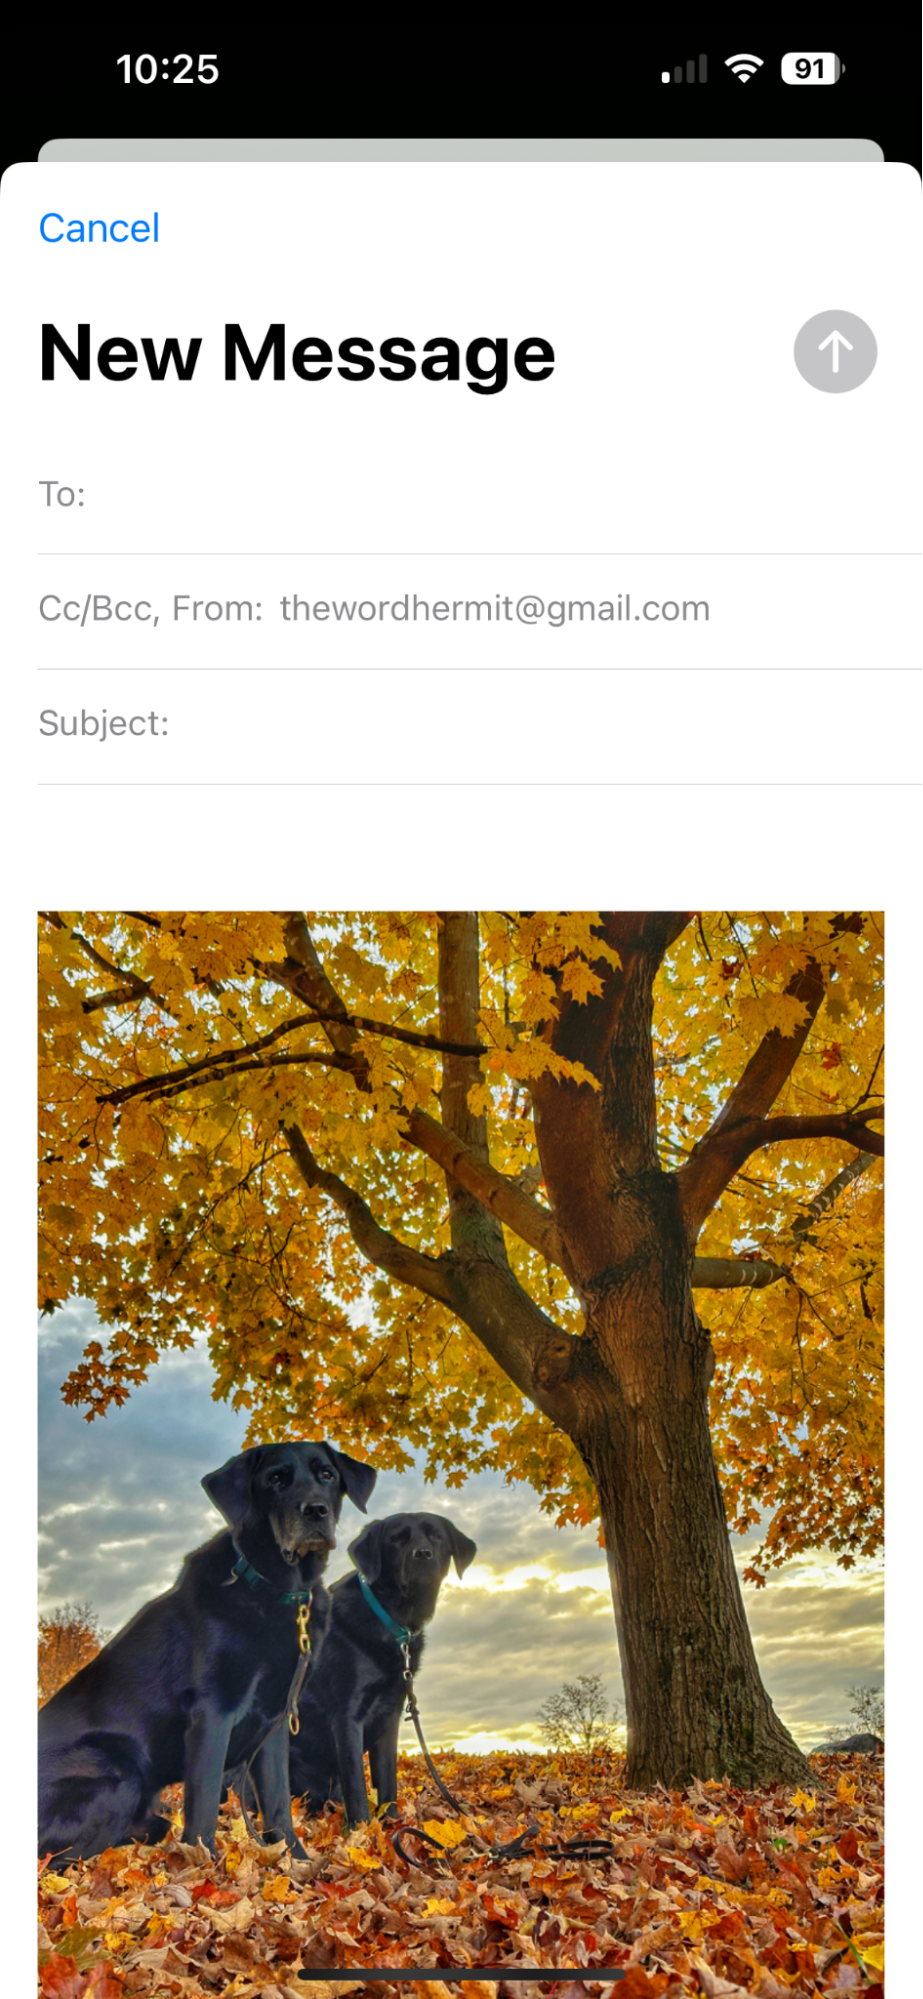 How to email a photo from iPhone